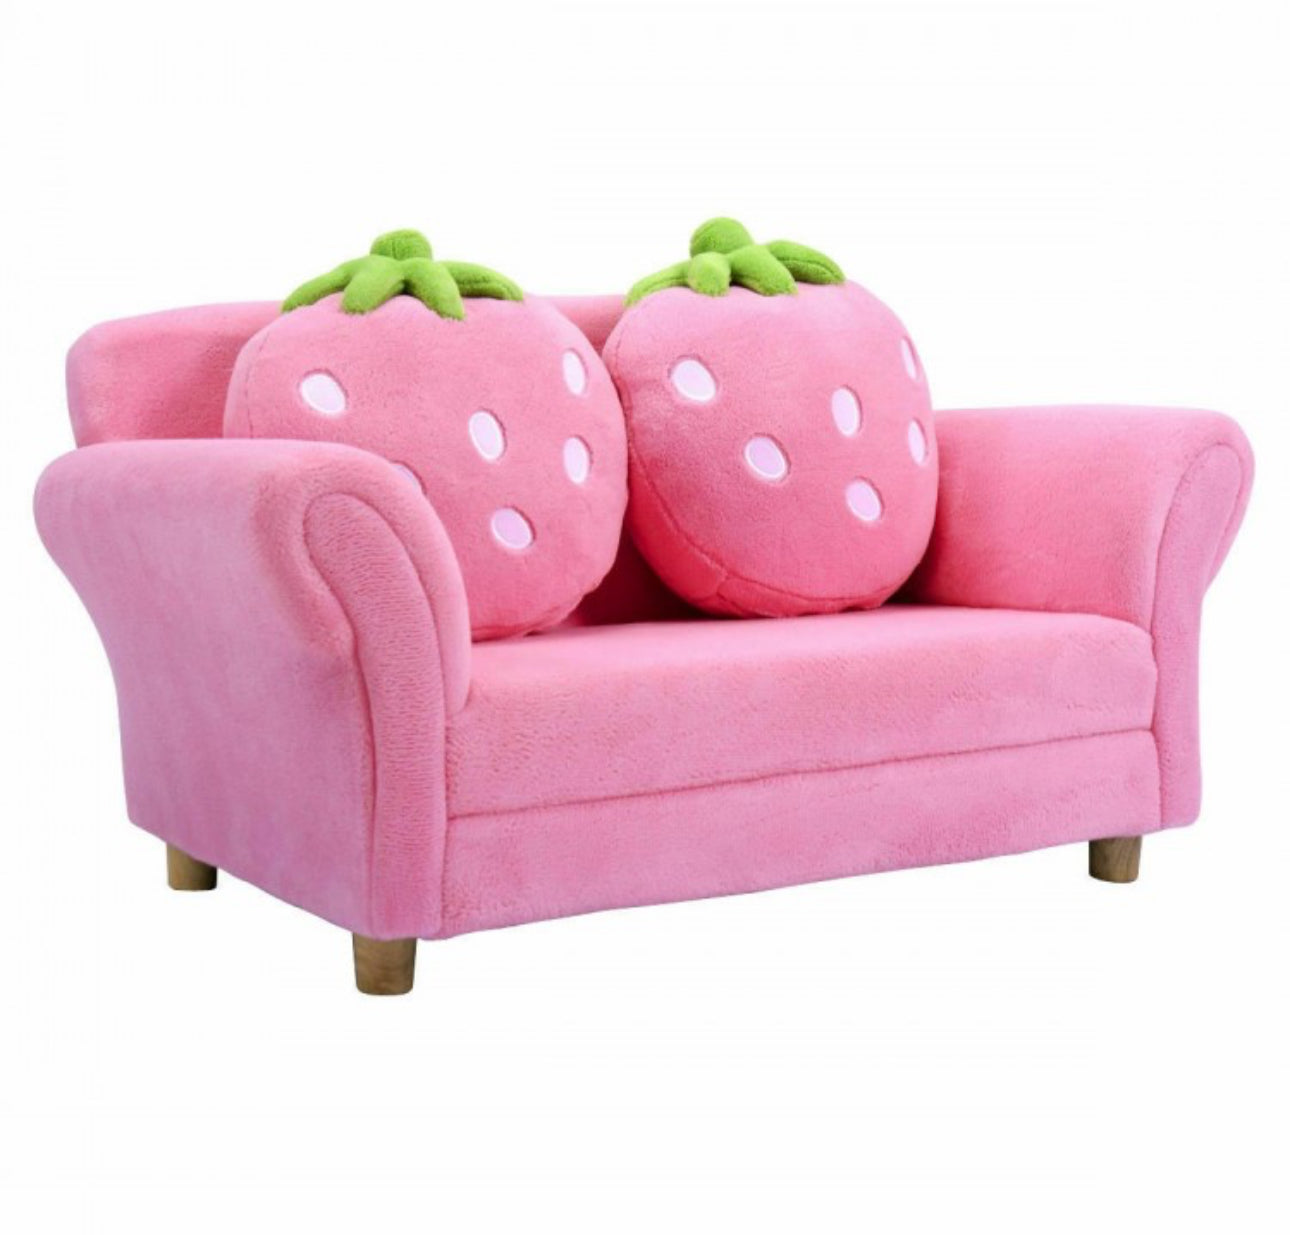 Very Adorable & Cute Comfortable Heavy Duty Pink Strawberry Armrest Chair Sofa Couch | 2 Strawberry Pillows | For 1-2 Kids |